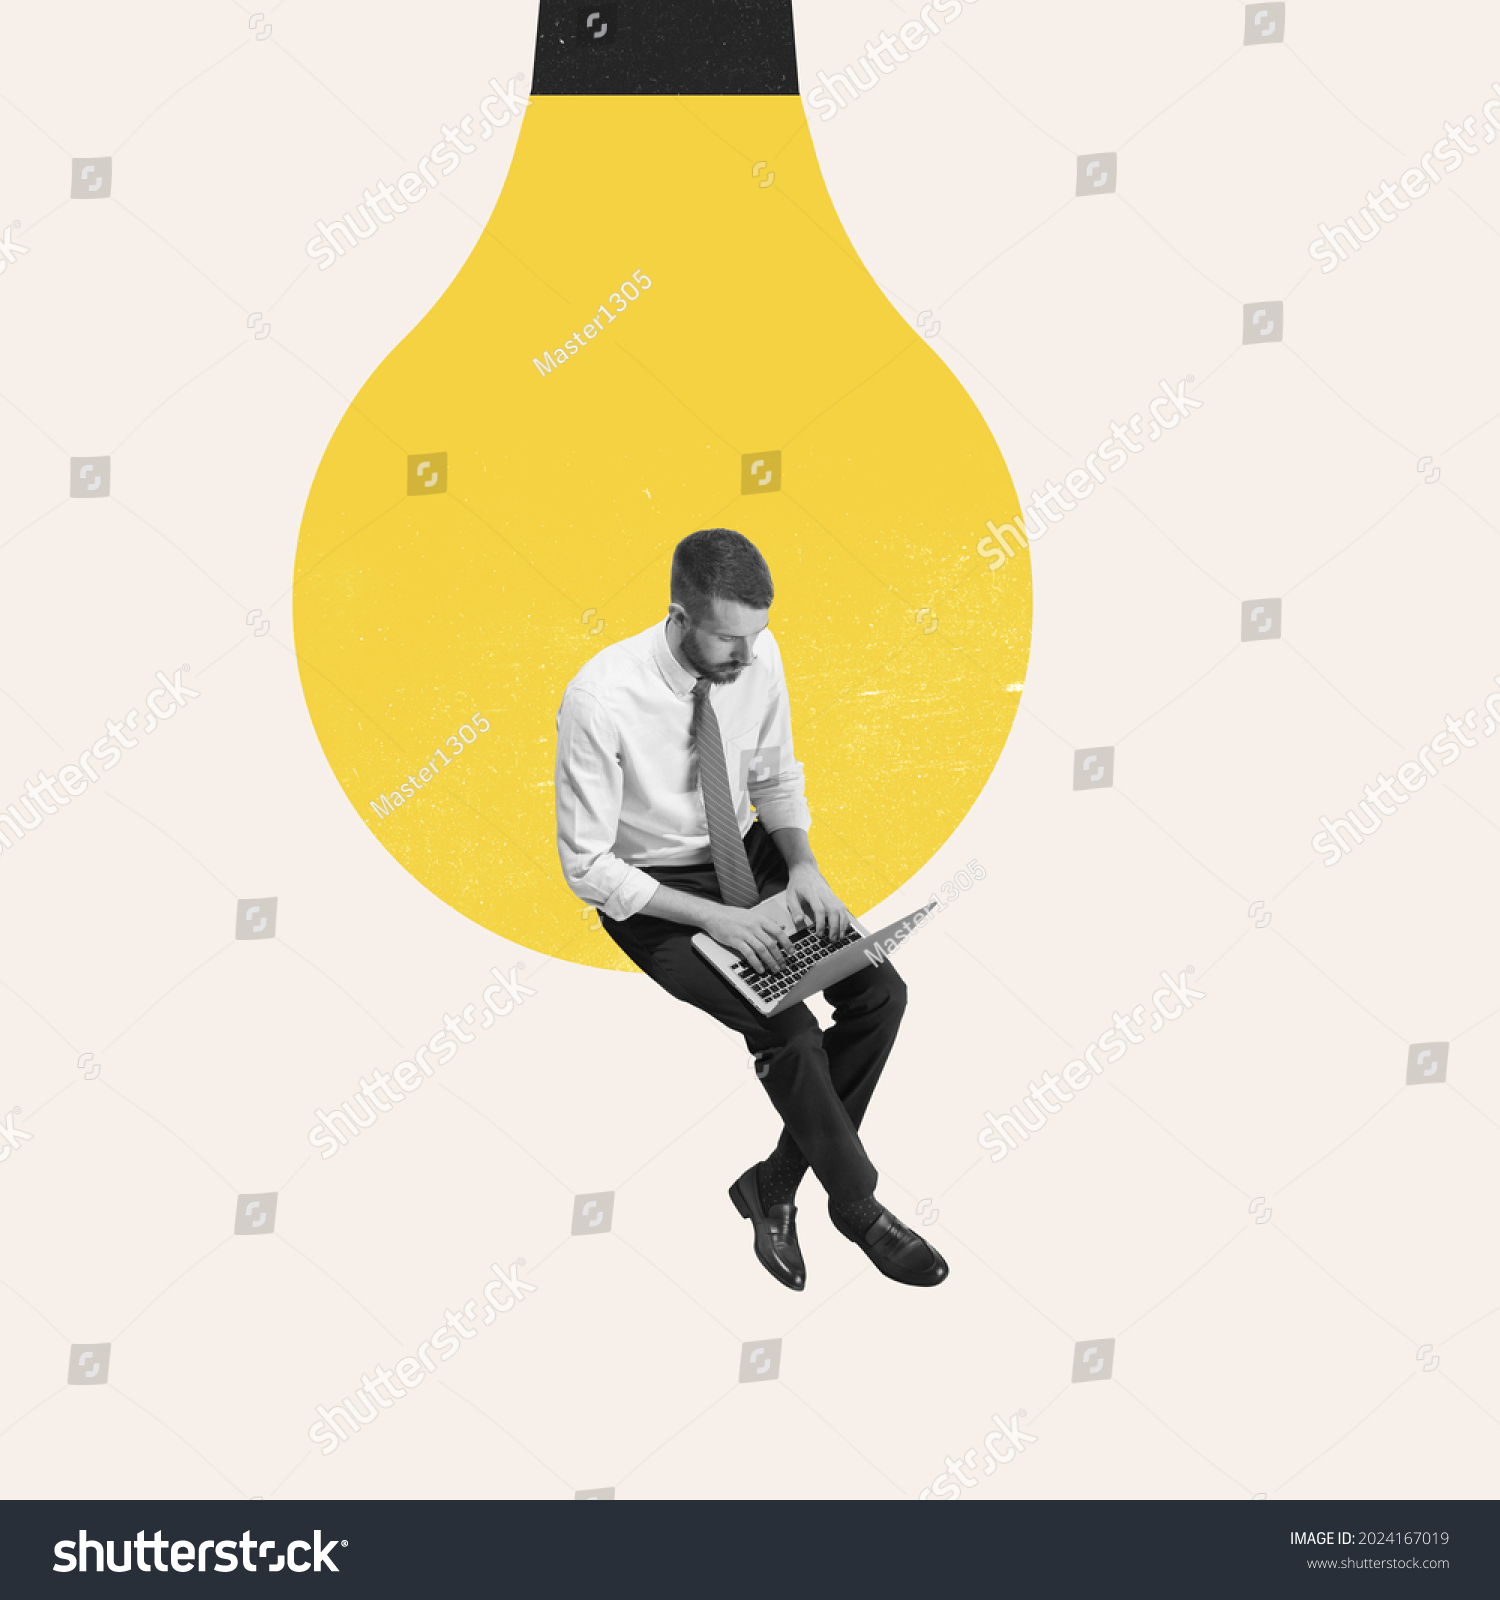 Online education, remote work. Young man manager or clerk using laptop isolated on light background. Contemporary art collage. Inspiration, idea, trendy. Concept of professional occupation, business #2024167019